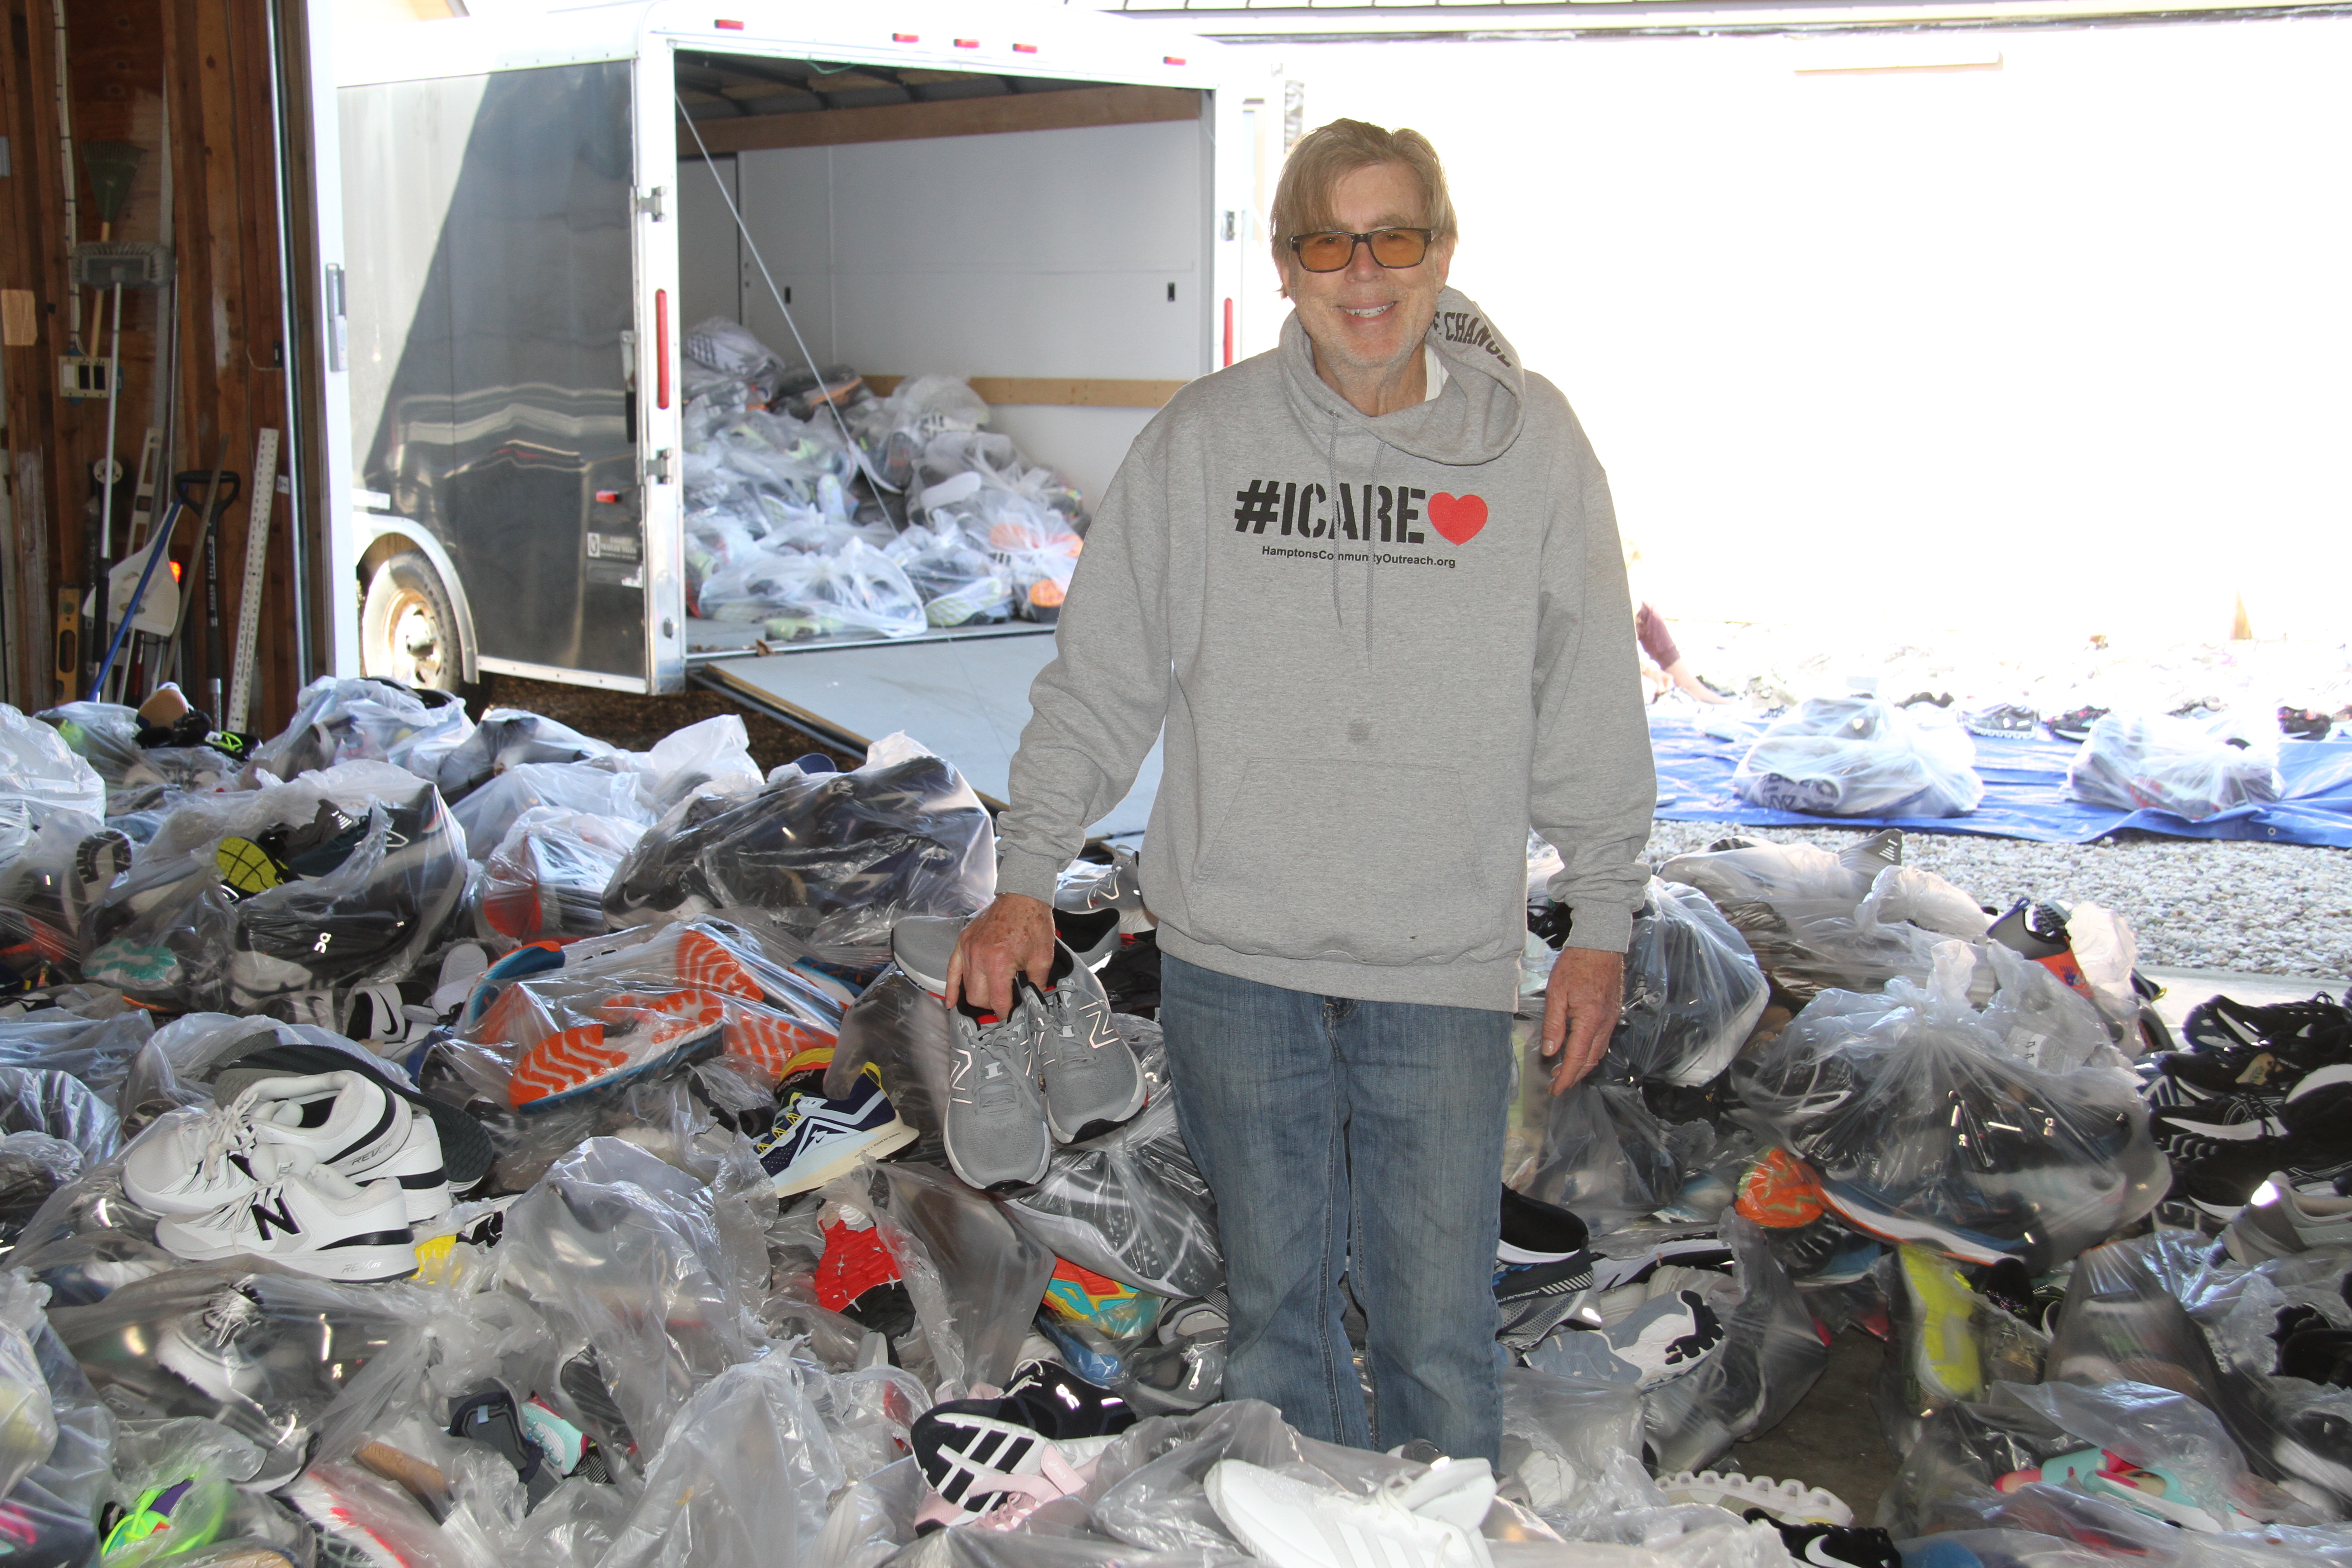 Chuck MacWhinnie is organizing the sorting of the shoes in a Southampton garage so they can be donated or sold to raise funds for charity.
MICHAEL WRIGHT